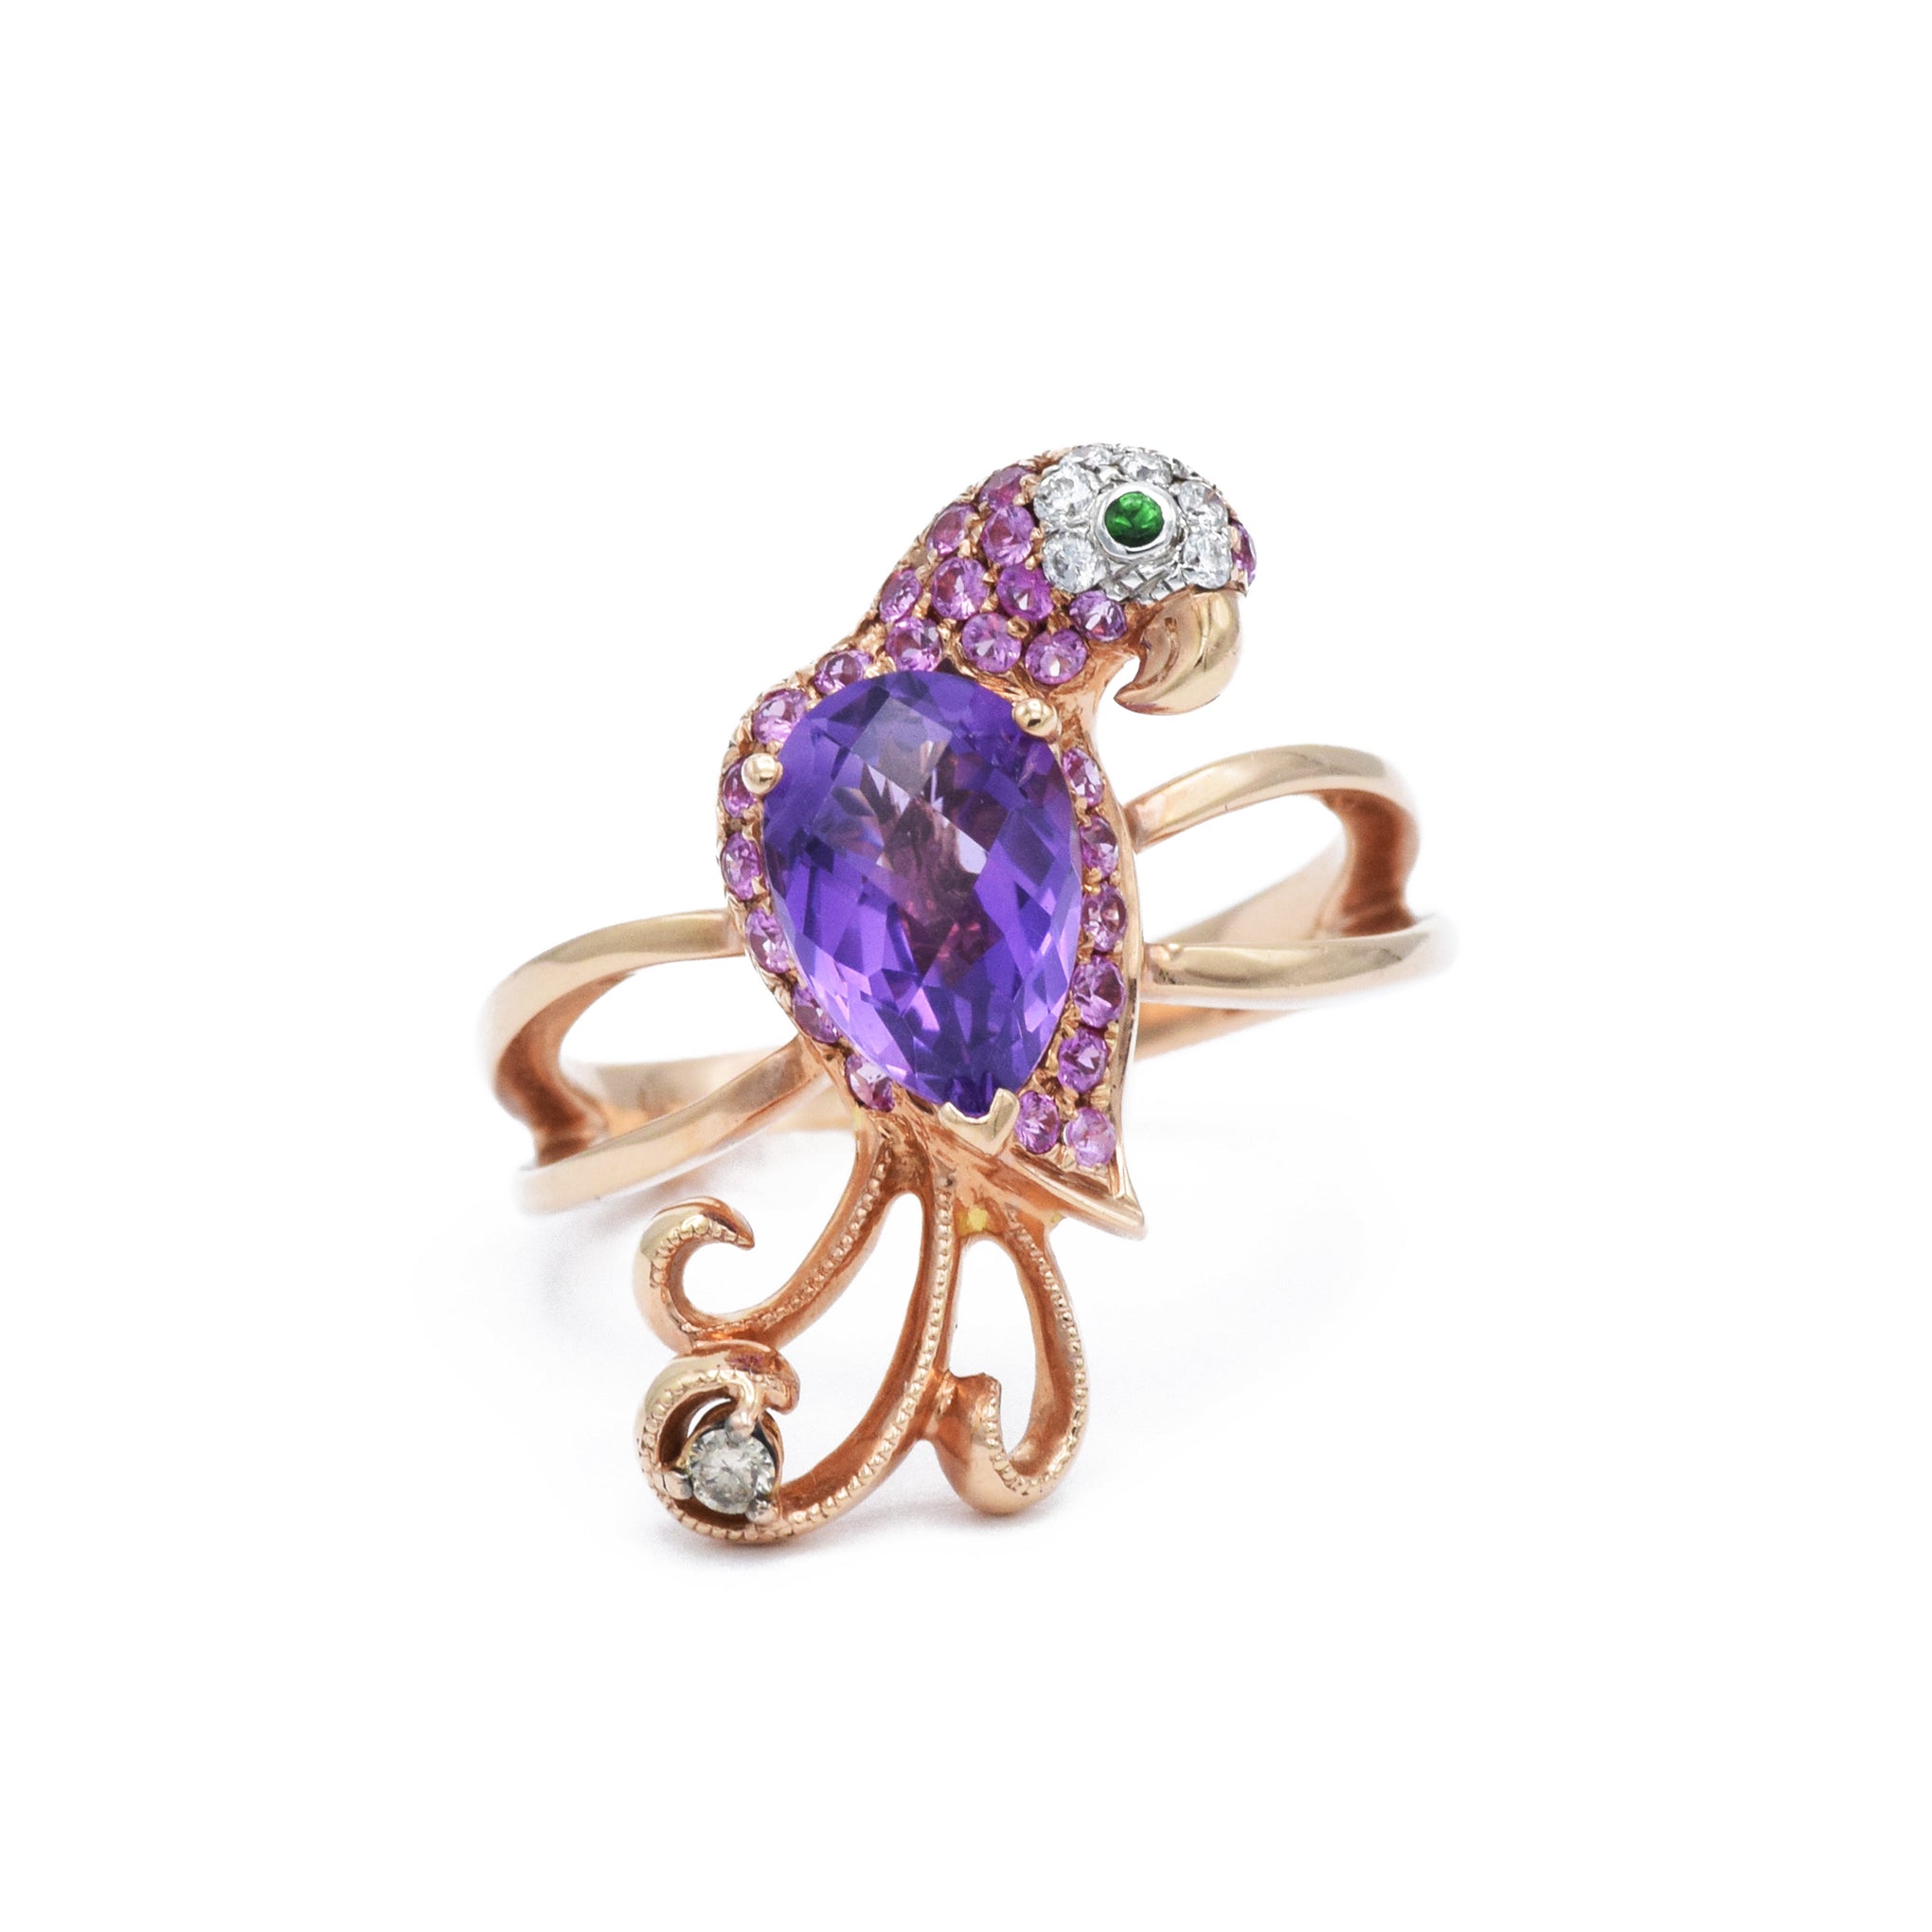 Parrot Ring with Amethyst, Sapphires, and Diamonds